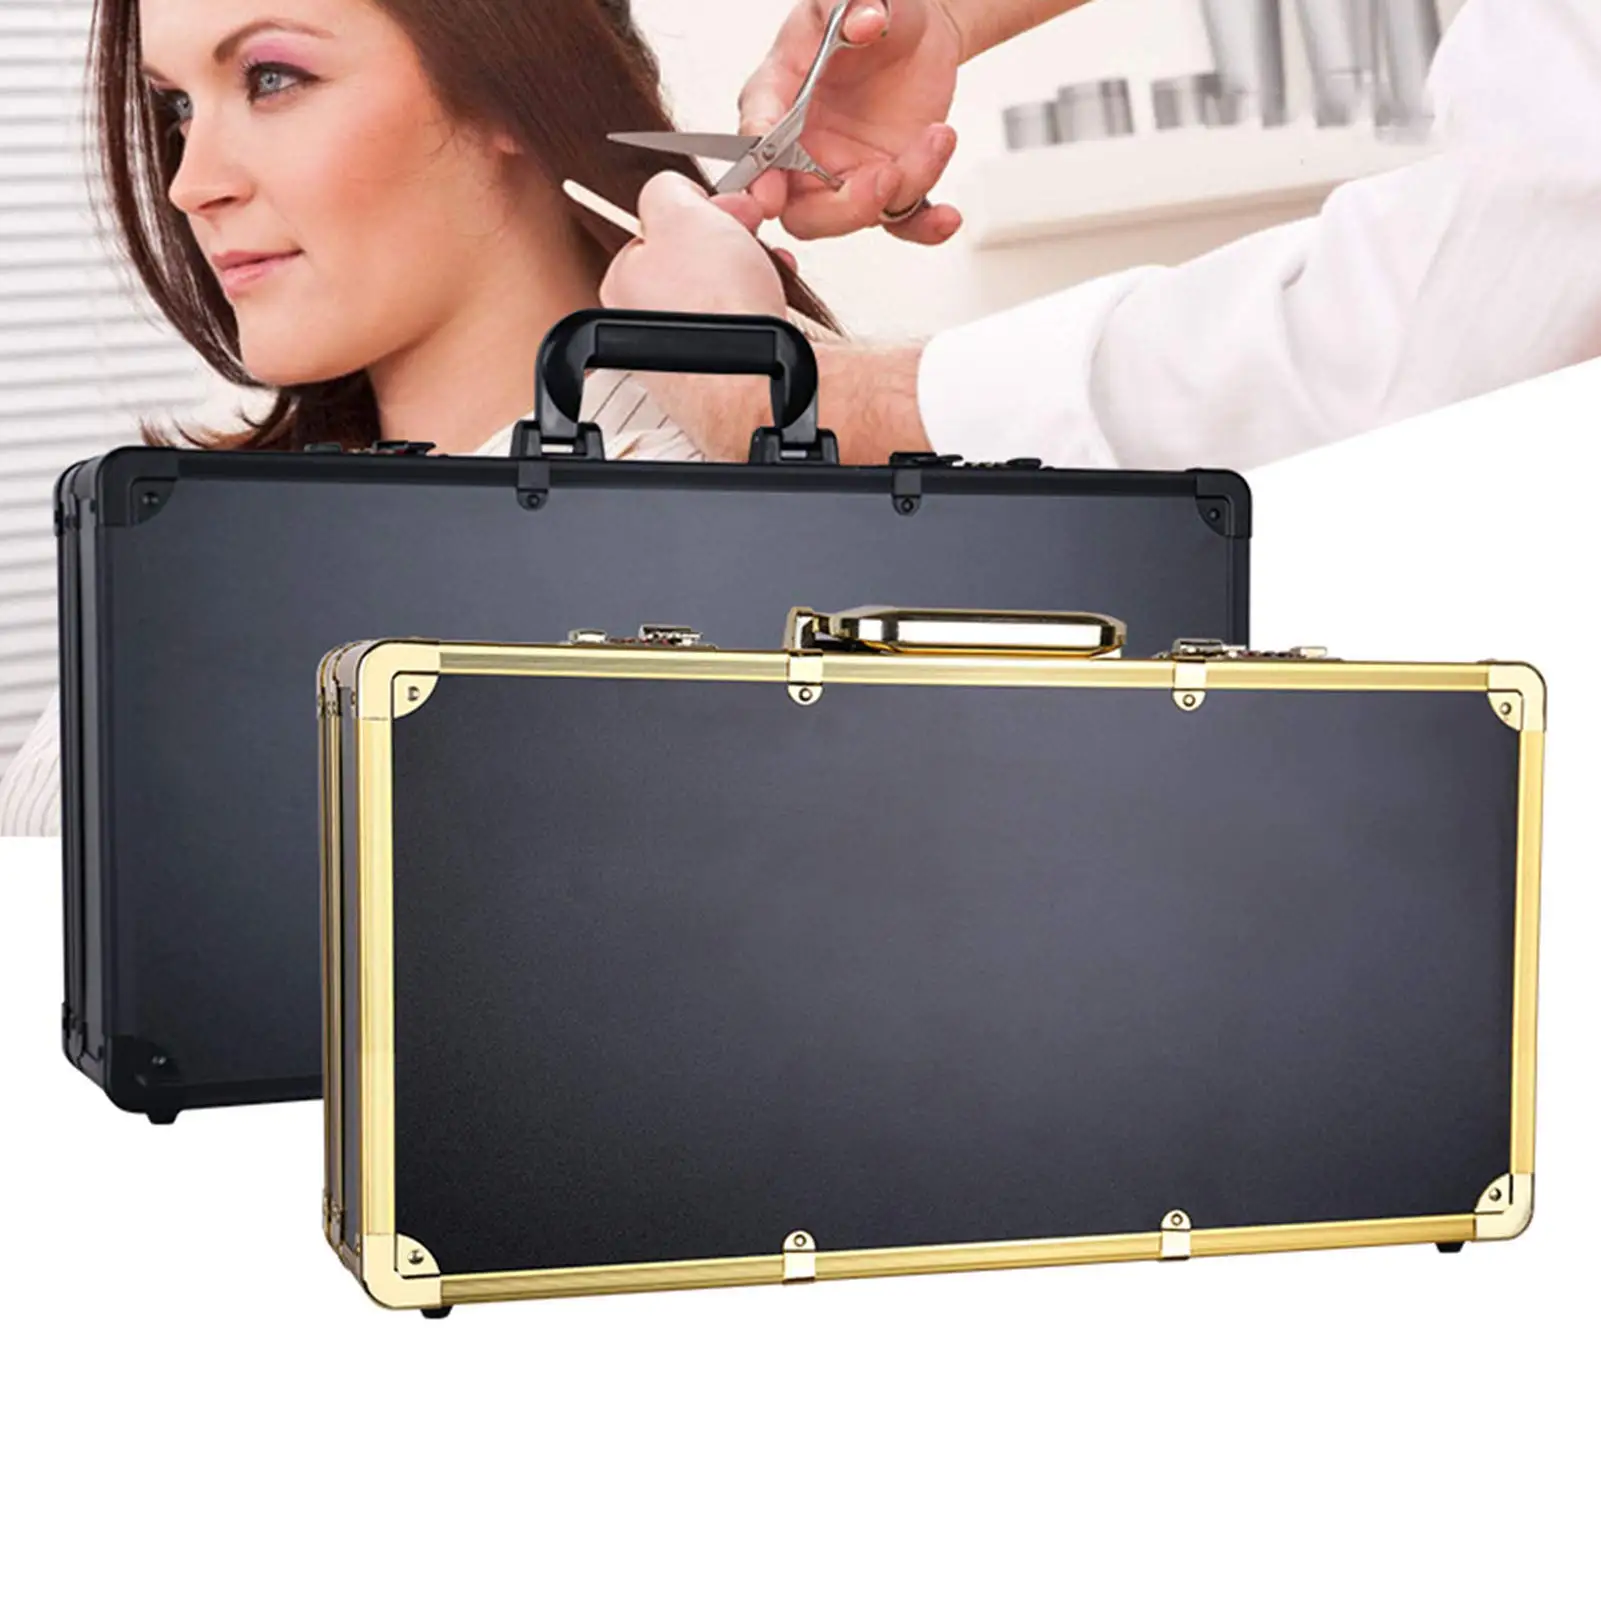 Professional Barber Aluminum Case Hairdressing Toolbox Large Capacity Travel Suitcase With Combination Lock Cosmetic Box w338 trolley case swivel wheel pack of 2 with screw luggage casters noise reduction silent suitcase wheel repairable replacement